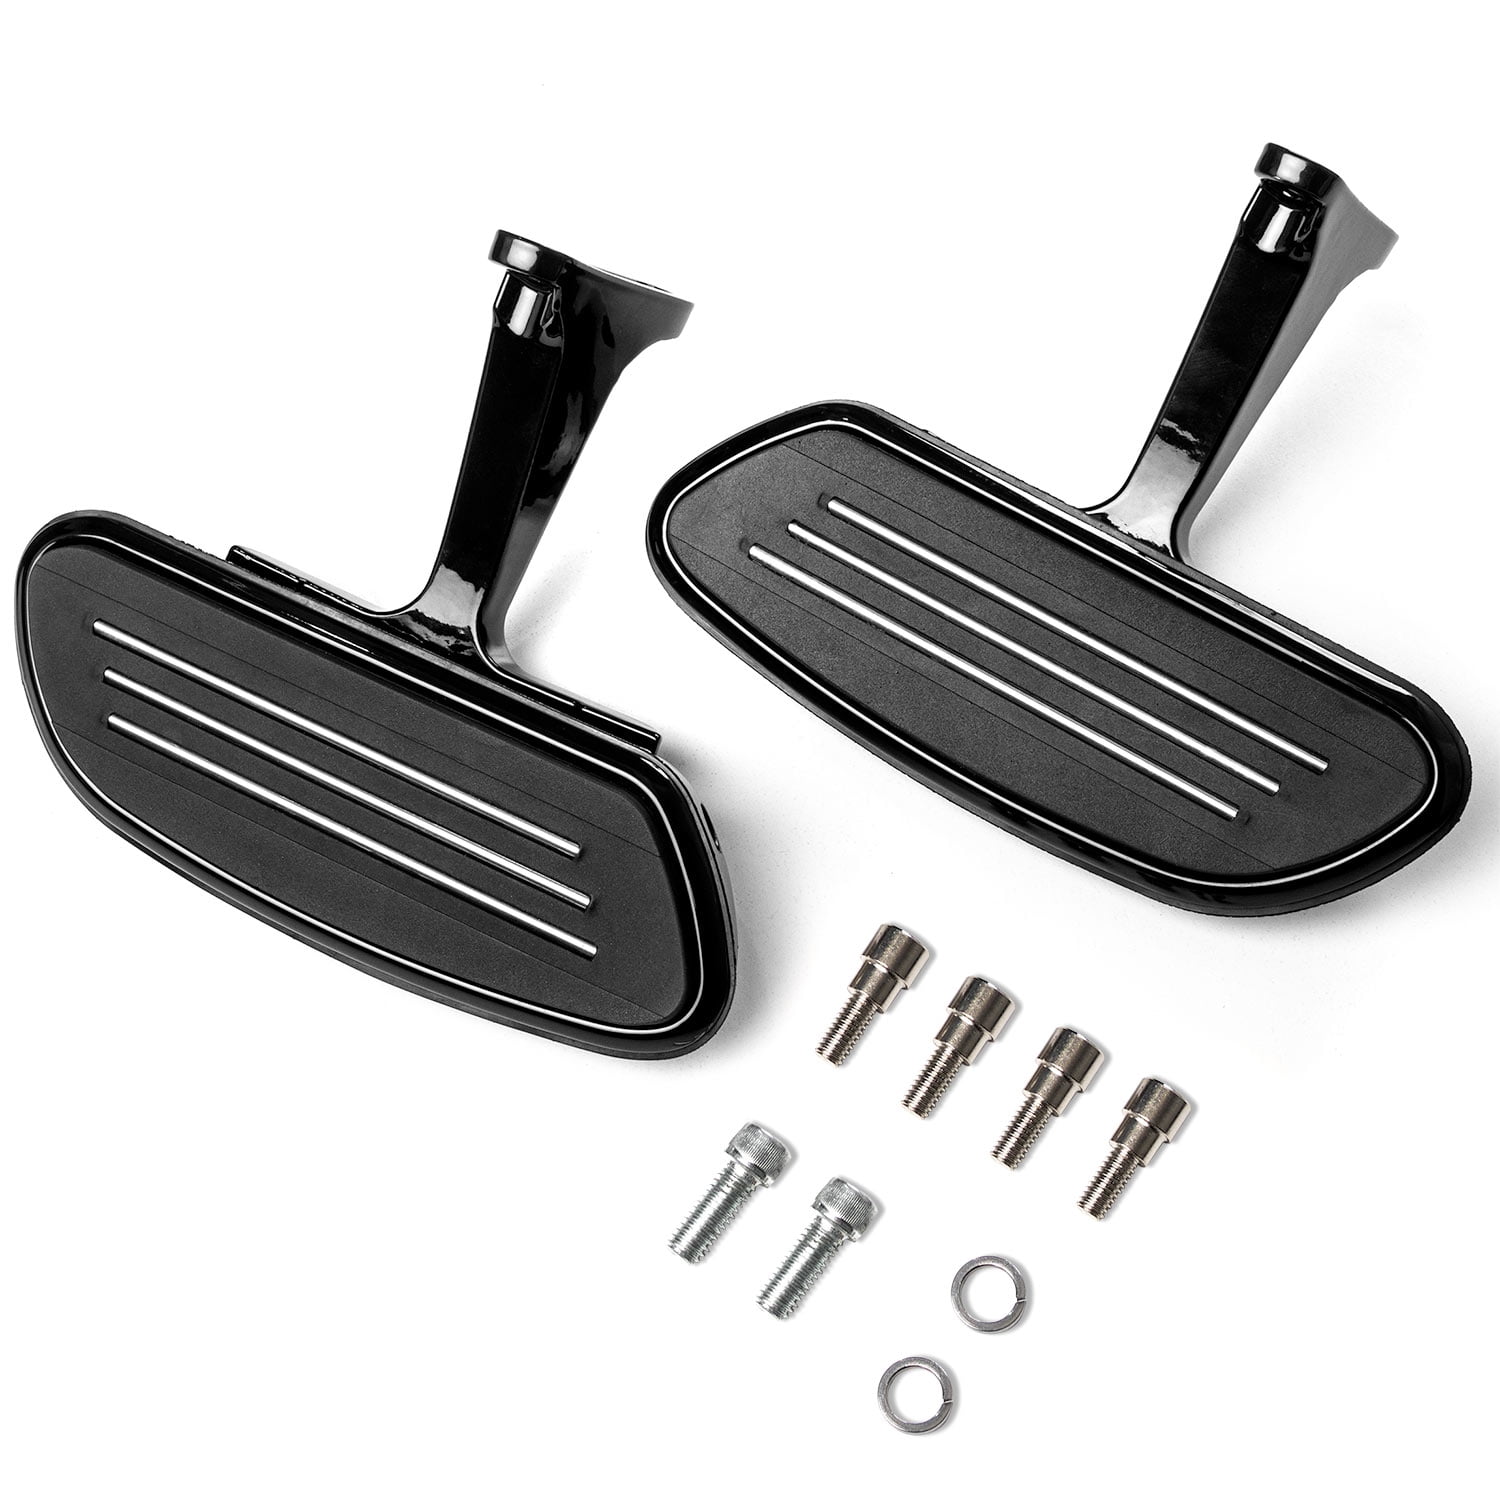 AUFER 2Pcs Motorcycle Front Driver Rider Inserts Floorboards Foot Peg Footrest Footboards Compatible For Touring Electra Glide Road Glide Road King Softail Black 